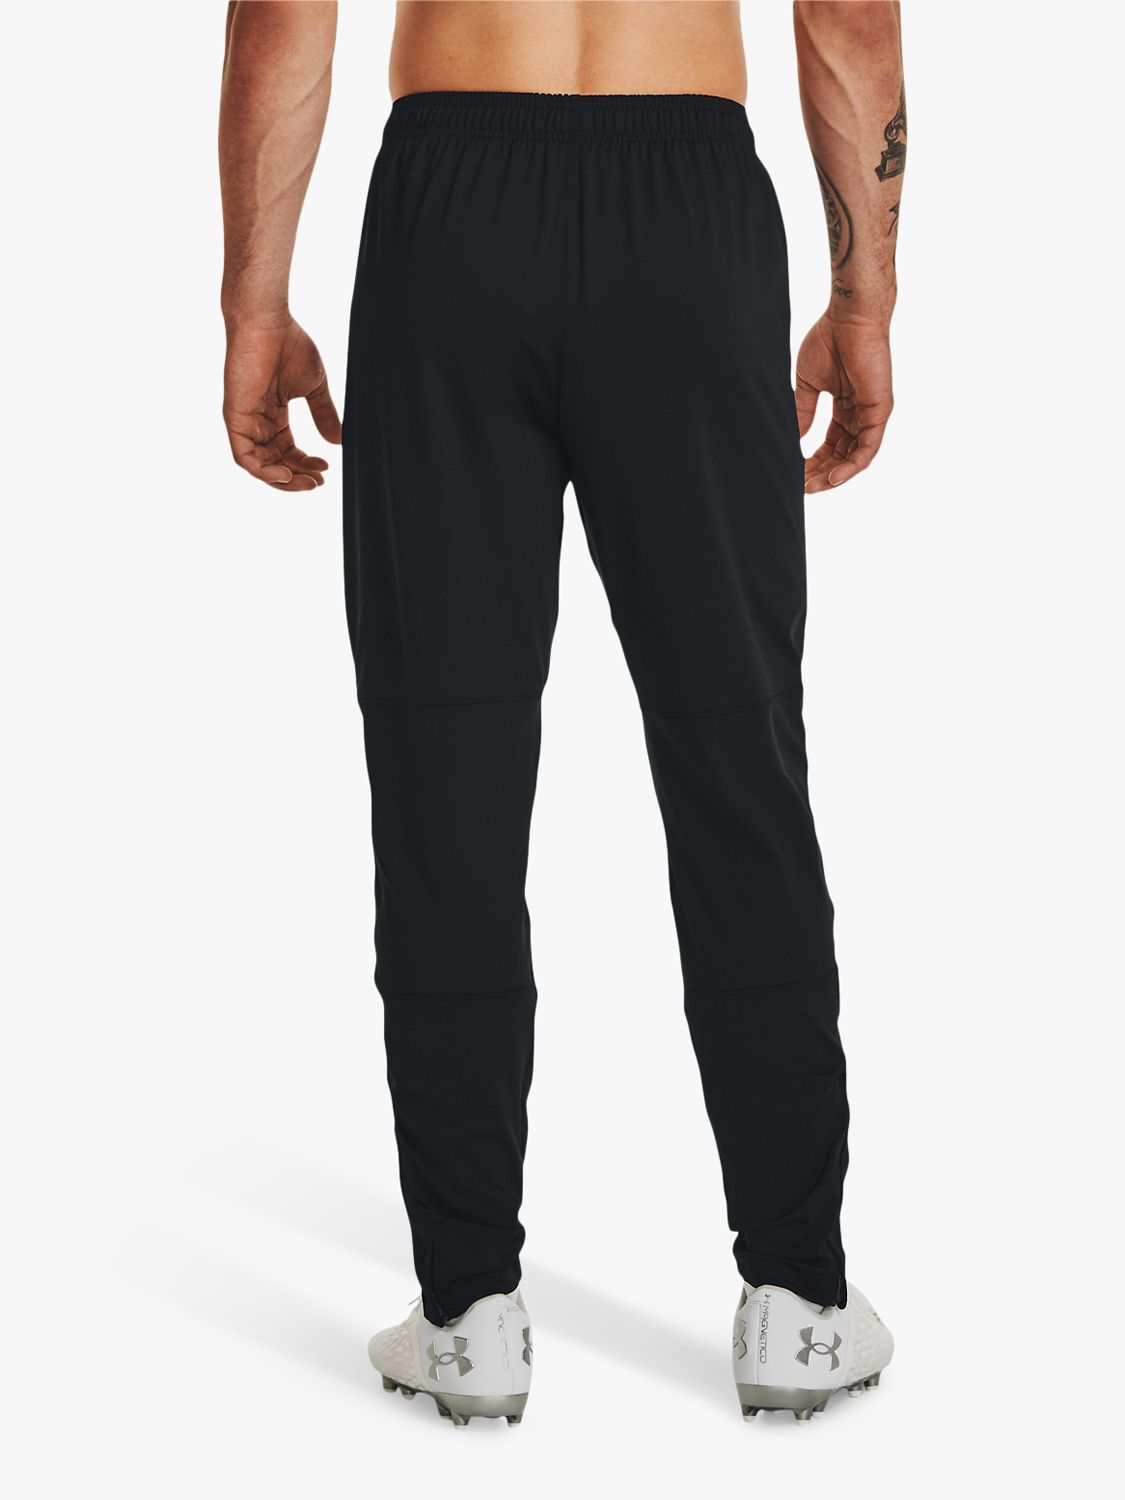 Under Armour Challenger Football Trousers at John Lewis & Partners